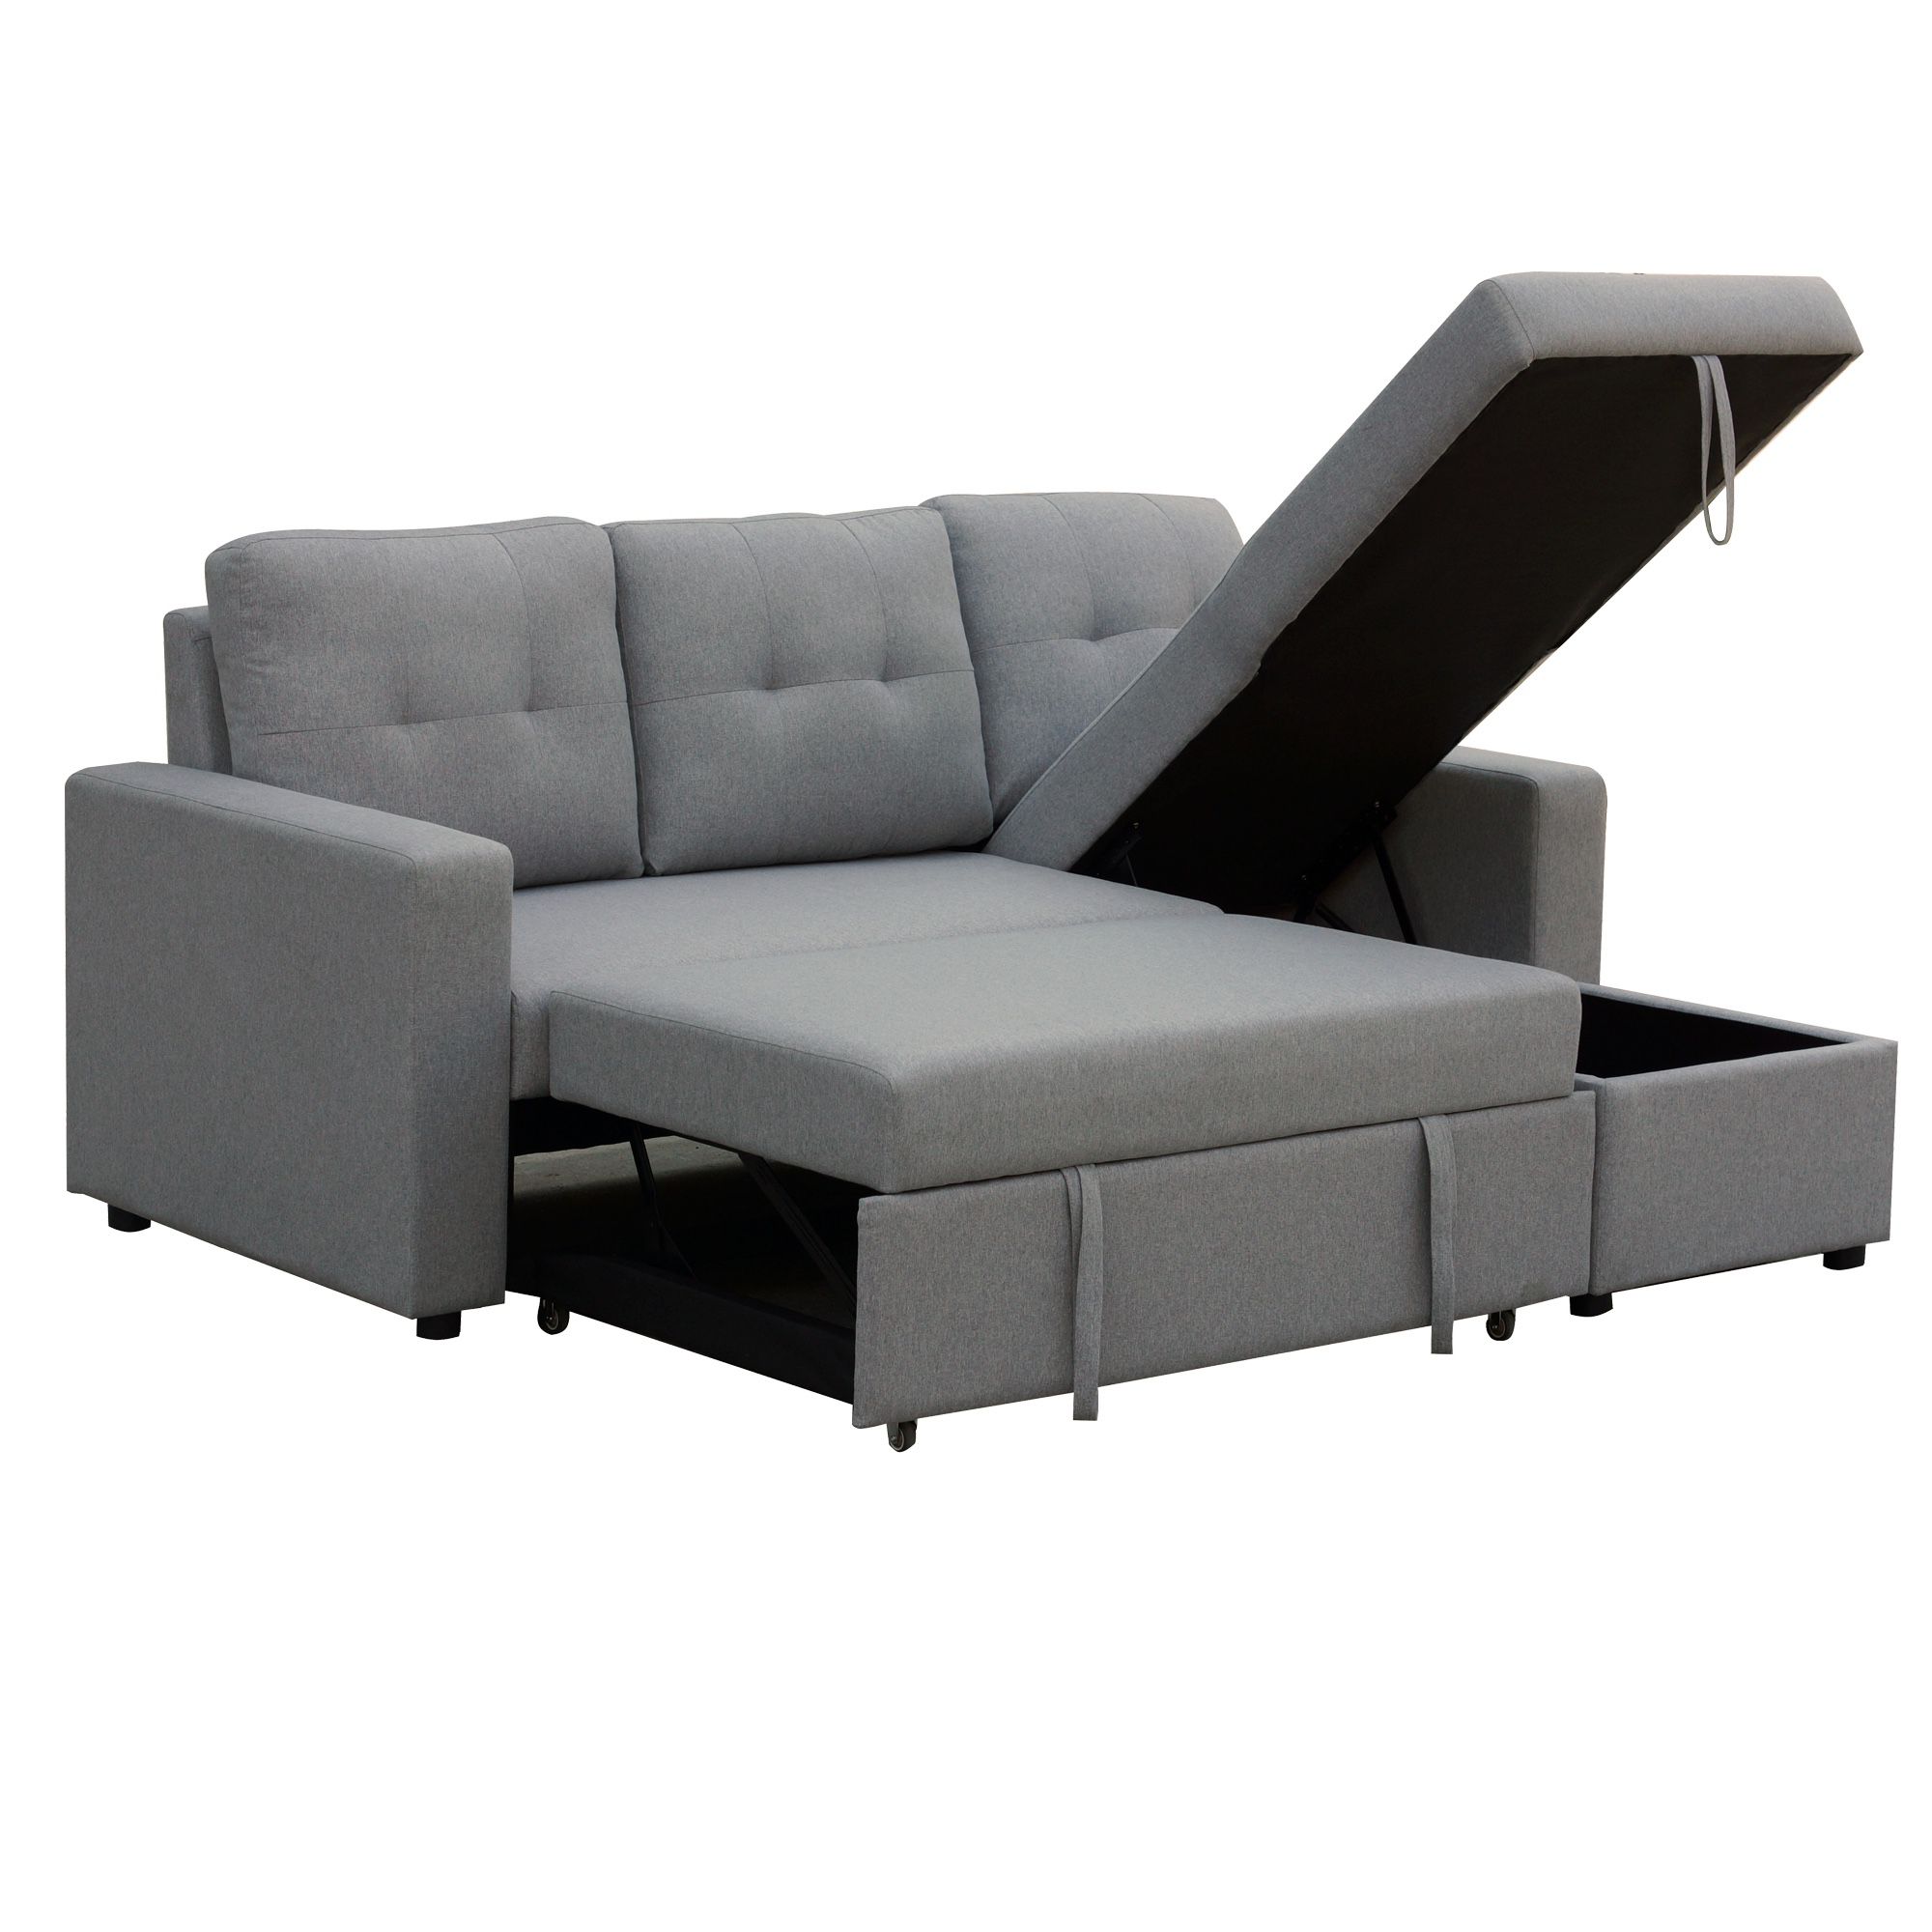 L Sectional Sofa Bed 🛏️ Folds Out Into A Bed Has Storage Compartment Brand New 